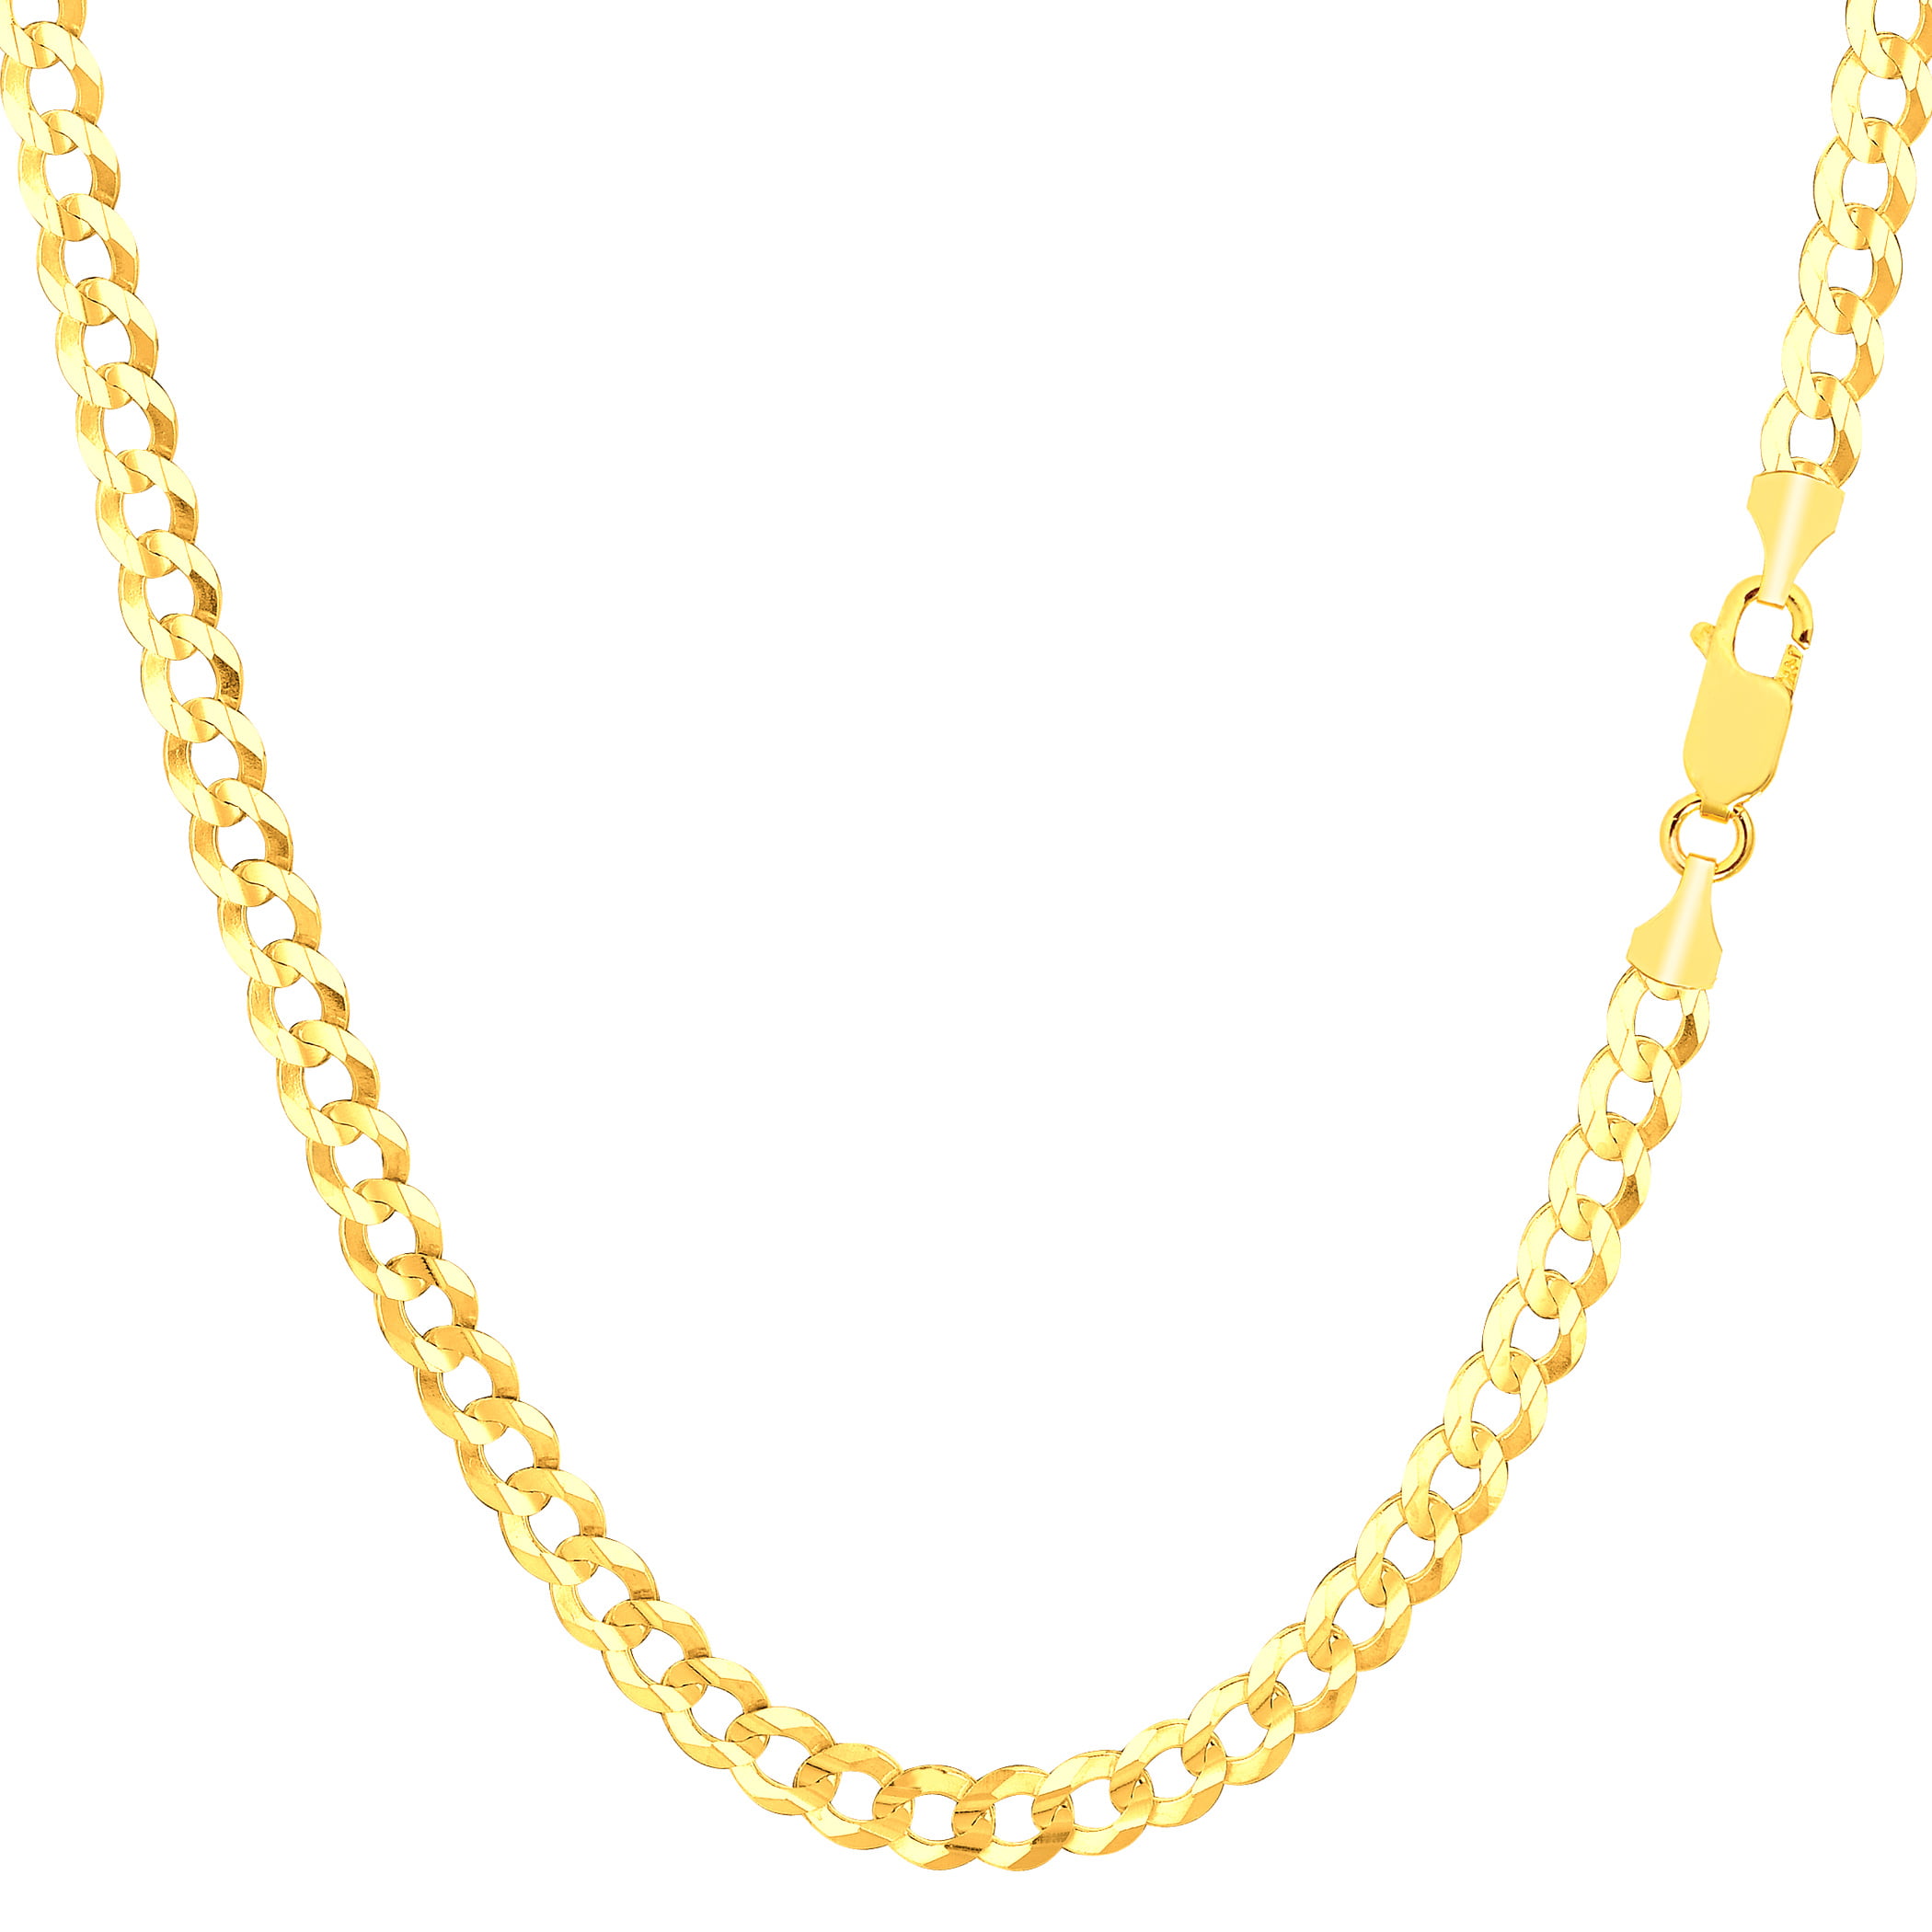 Solid 14K Yellow Gold Handmade Half Round Curb Chain Necklace, Sizes 6